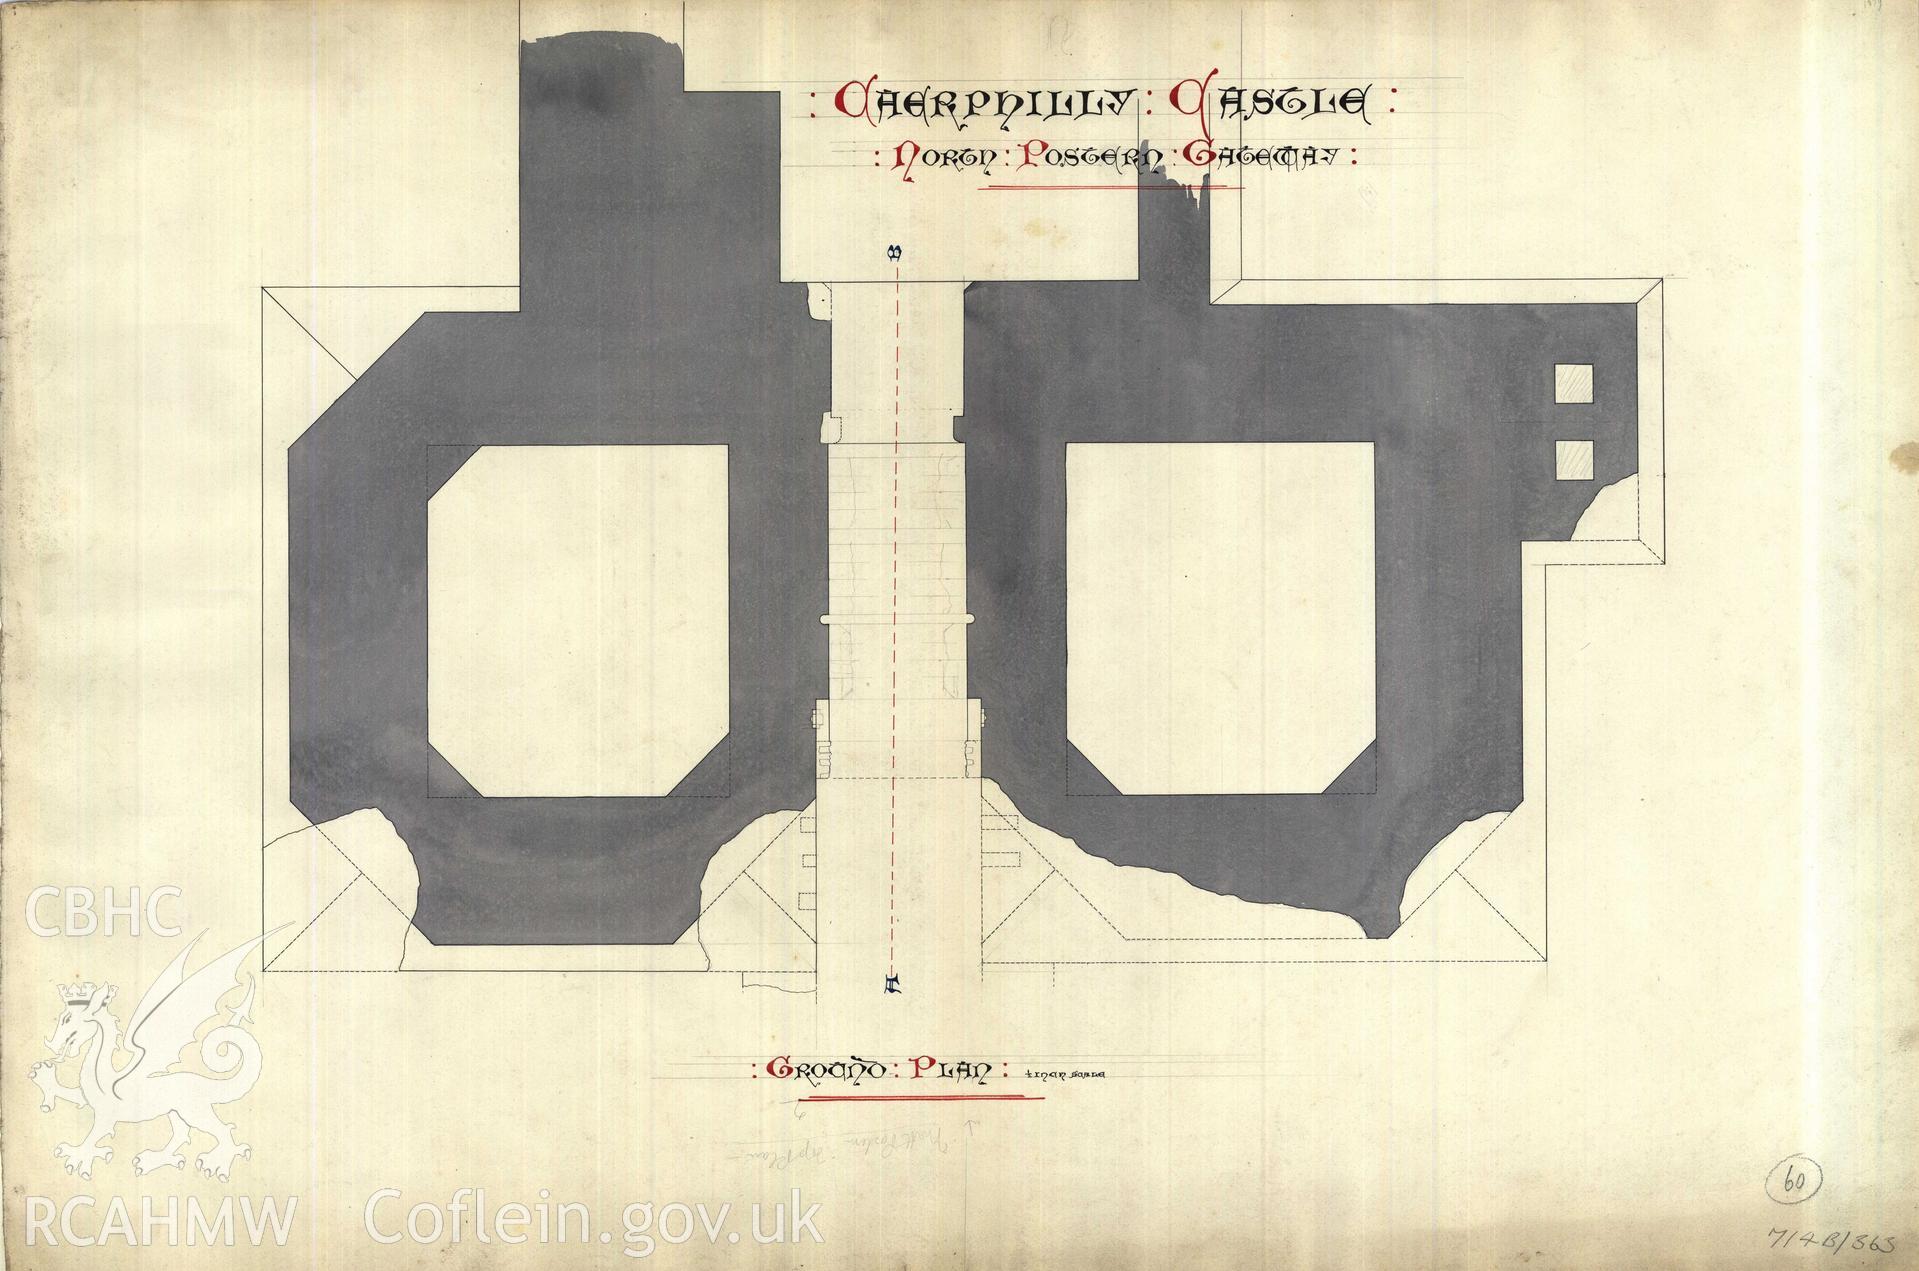 Cadw guardianship monument drawing of Caerphilly Castle. Dam N gate, ground plan. Cadw Ref. No:714B/363. Scale 1:24.